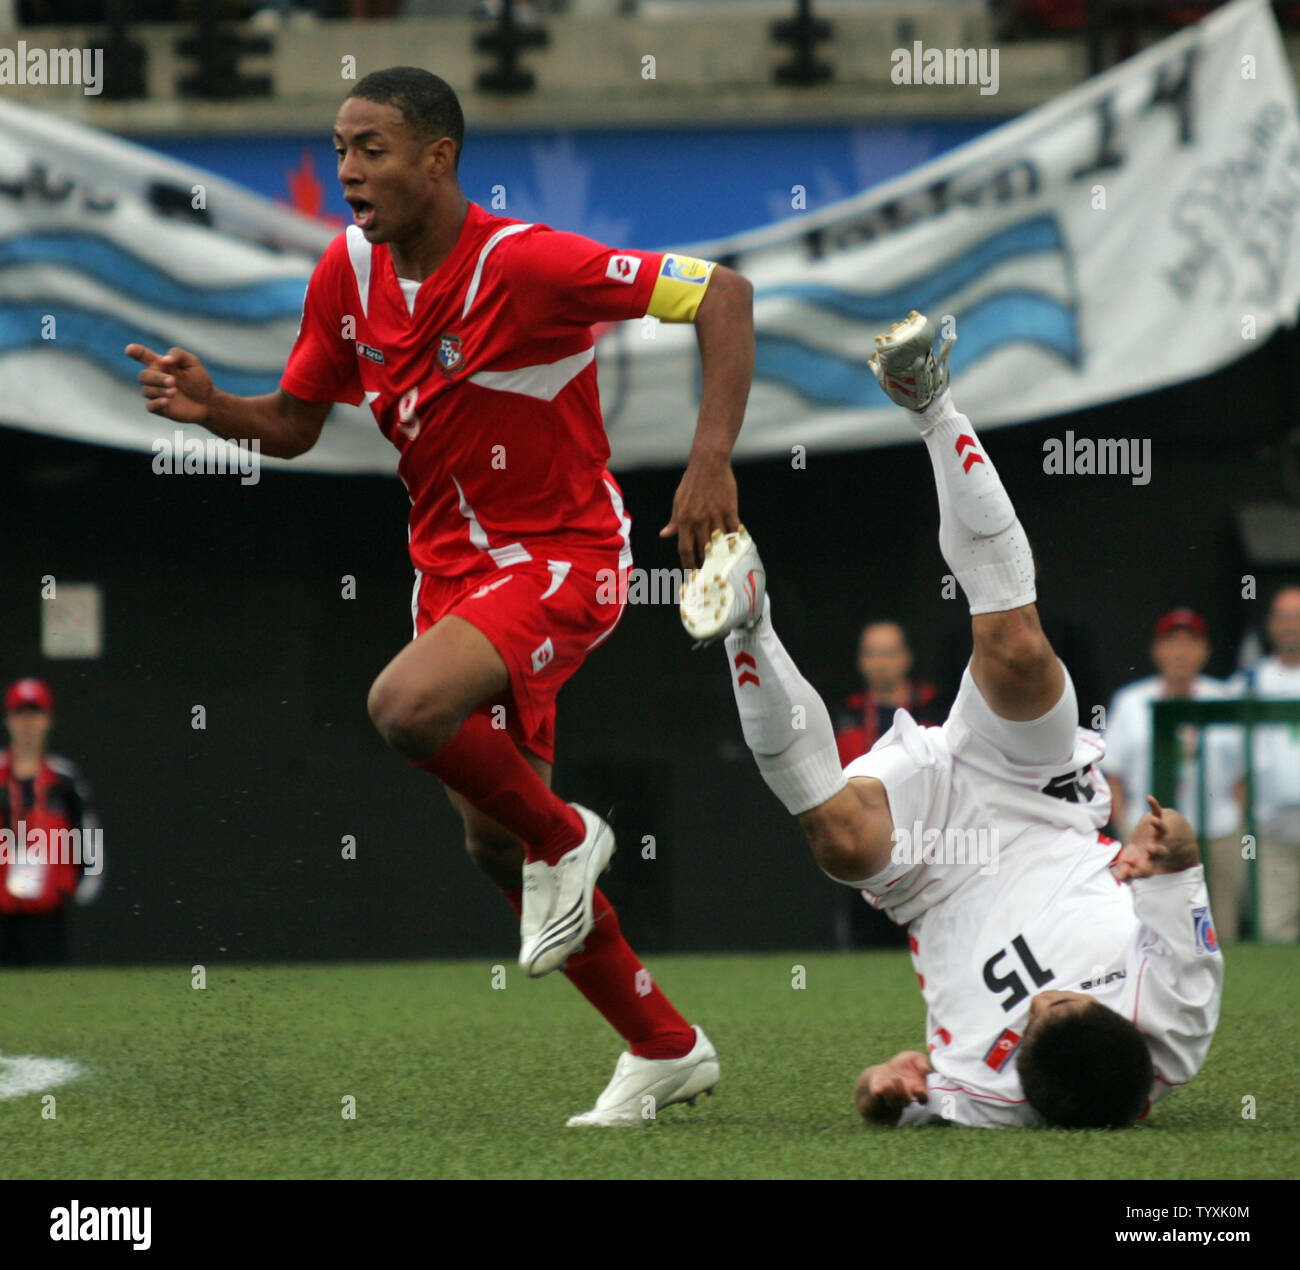 Panama's forward Gabriel Torres (L) pursues the ball after scrimmaging with North Korean defender Yong Il Yun (15) during the second half of the opening FIFA Under-20 World Cup match at Frank Clair Stadium in Ottawa, Canada on June 30, 2007. The match ended in a scoreless tie. (UPI Photo/Grace Chiu). Stock Photo